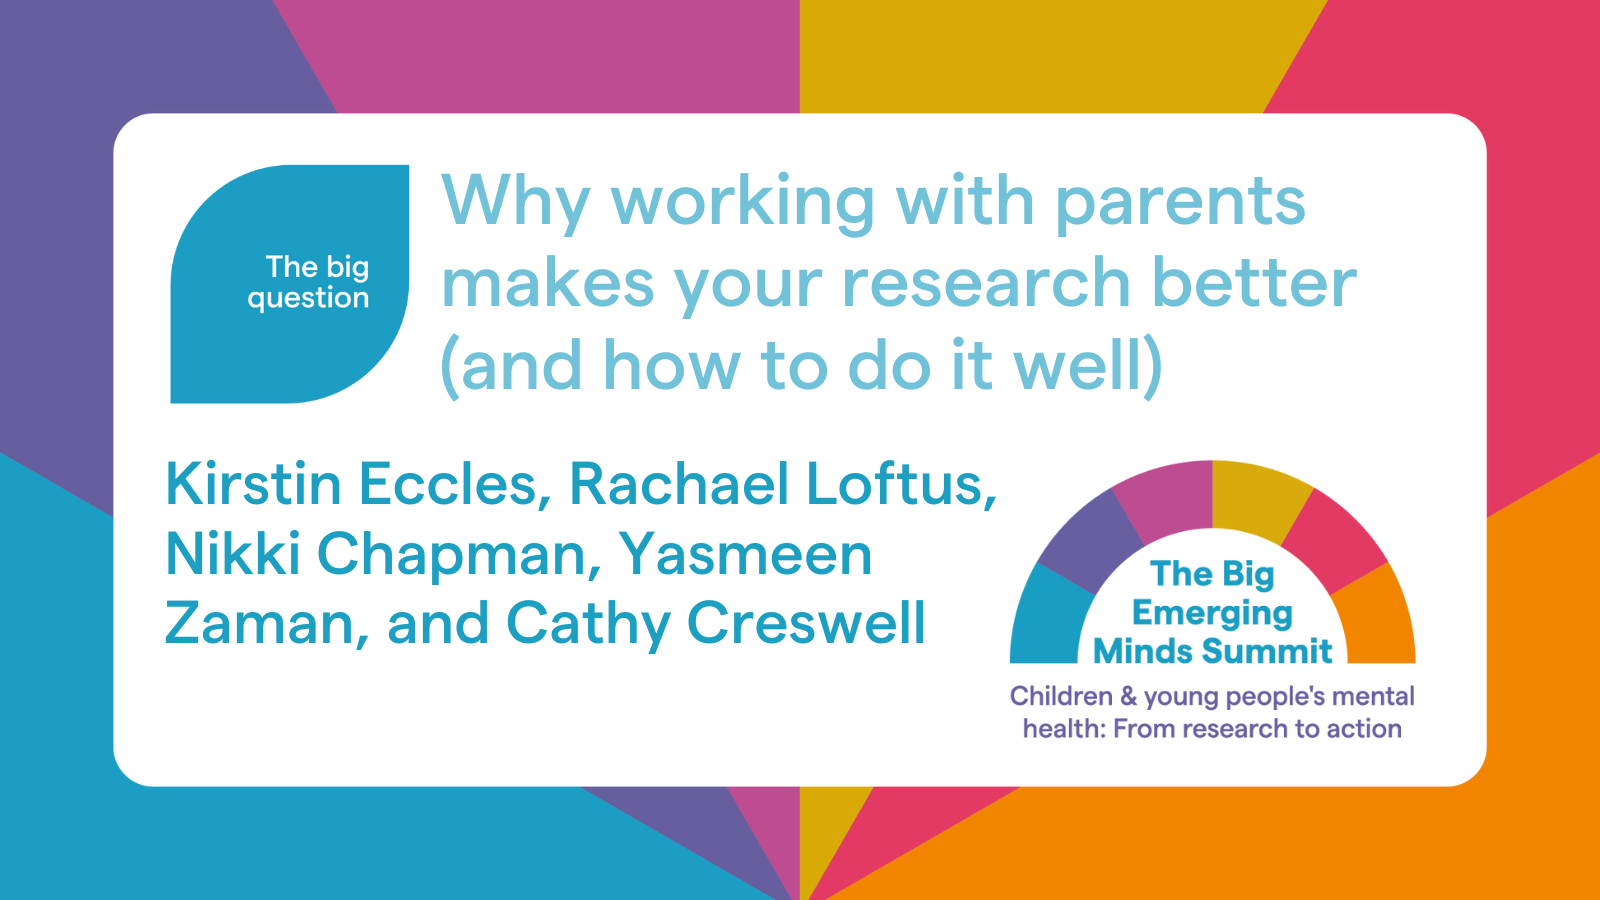 Why working with parents makes your research better (and how to do it well)